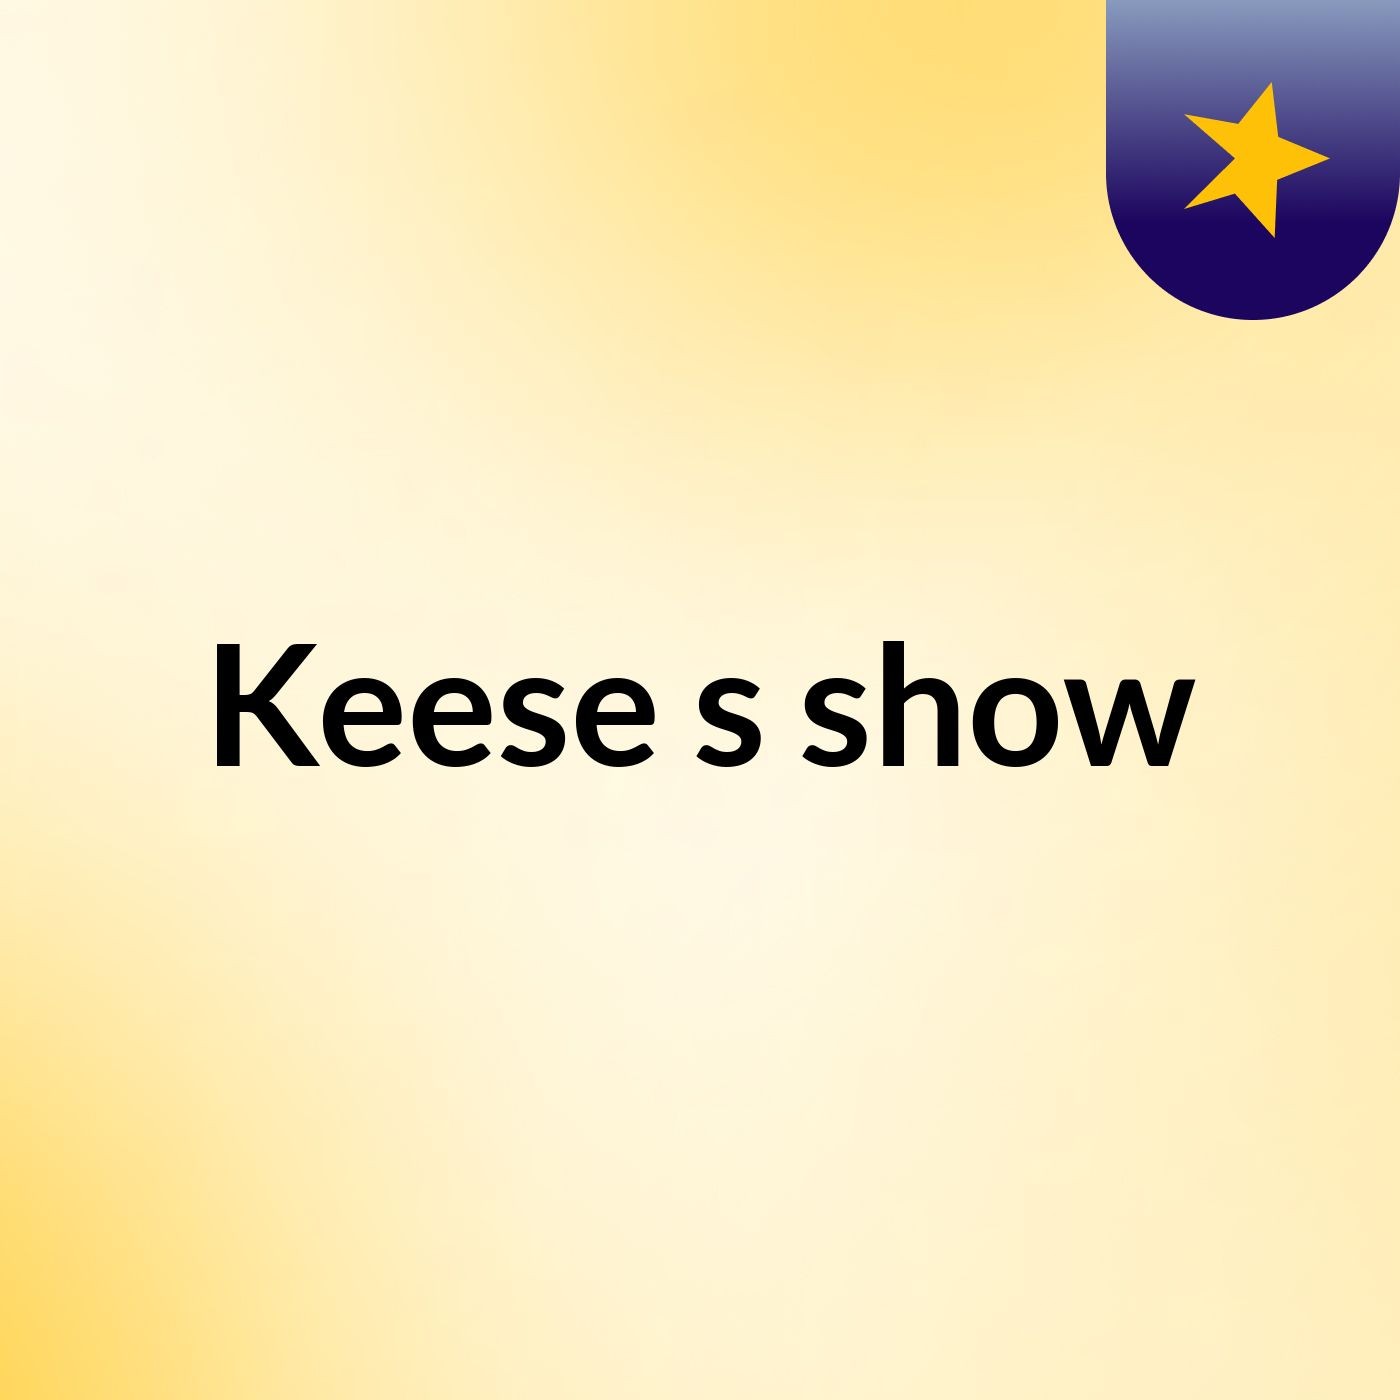 Keese's show